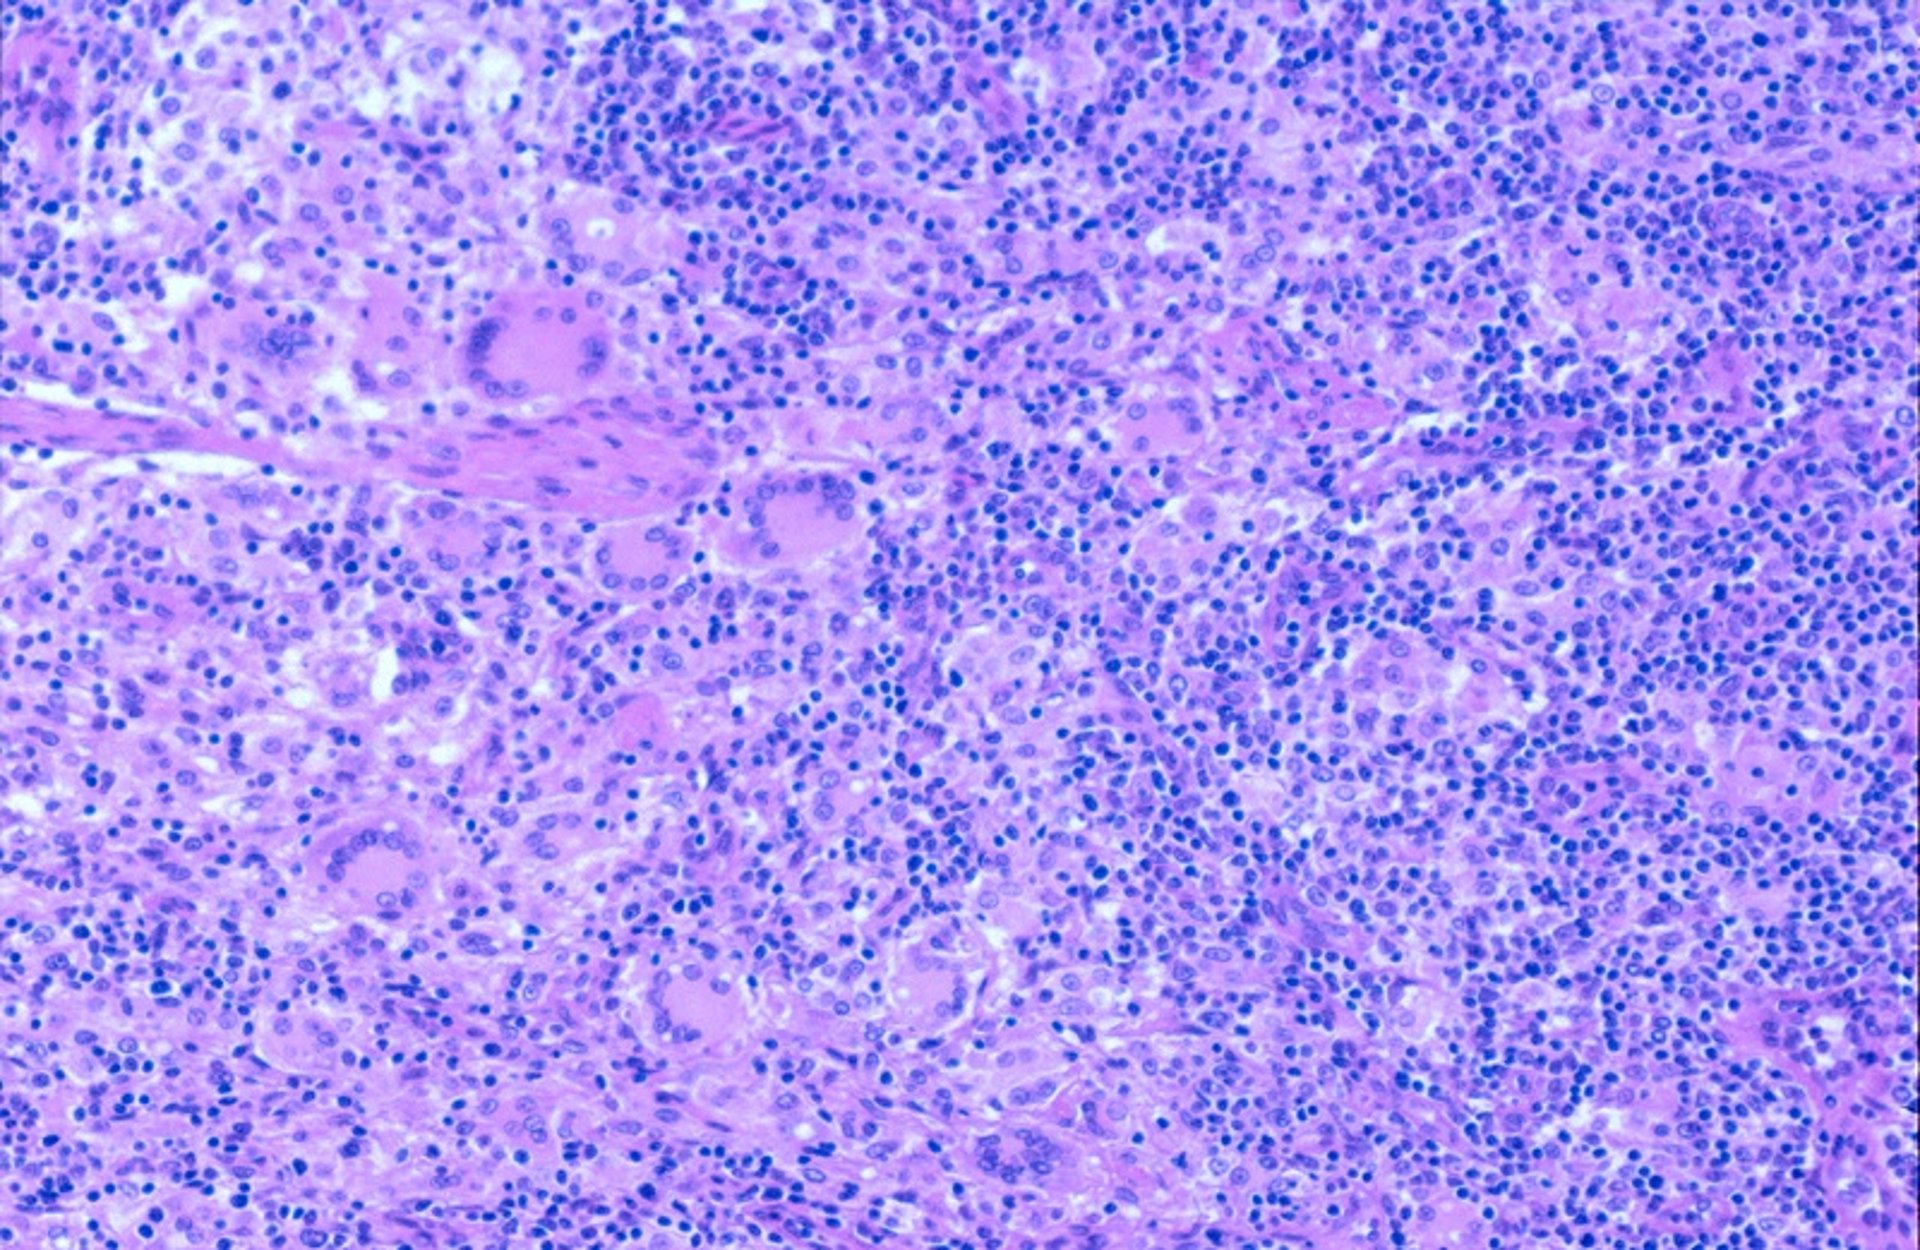 Histopathology of a PCV-2-SD-affected pig